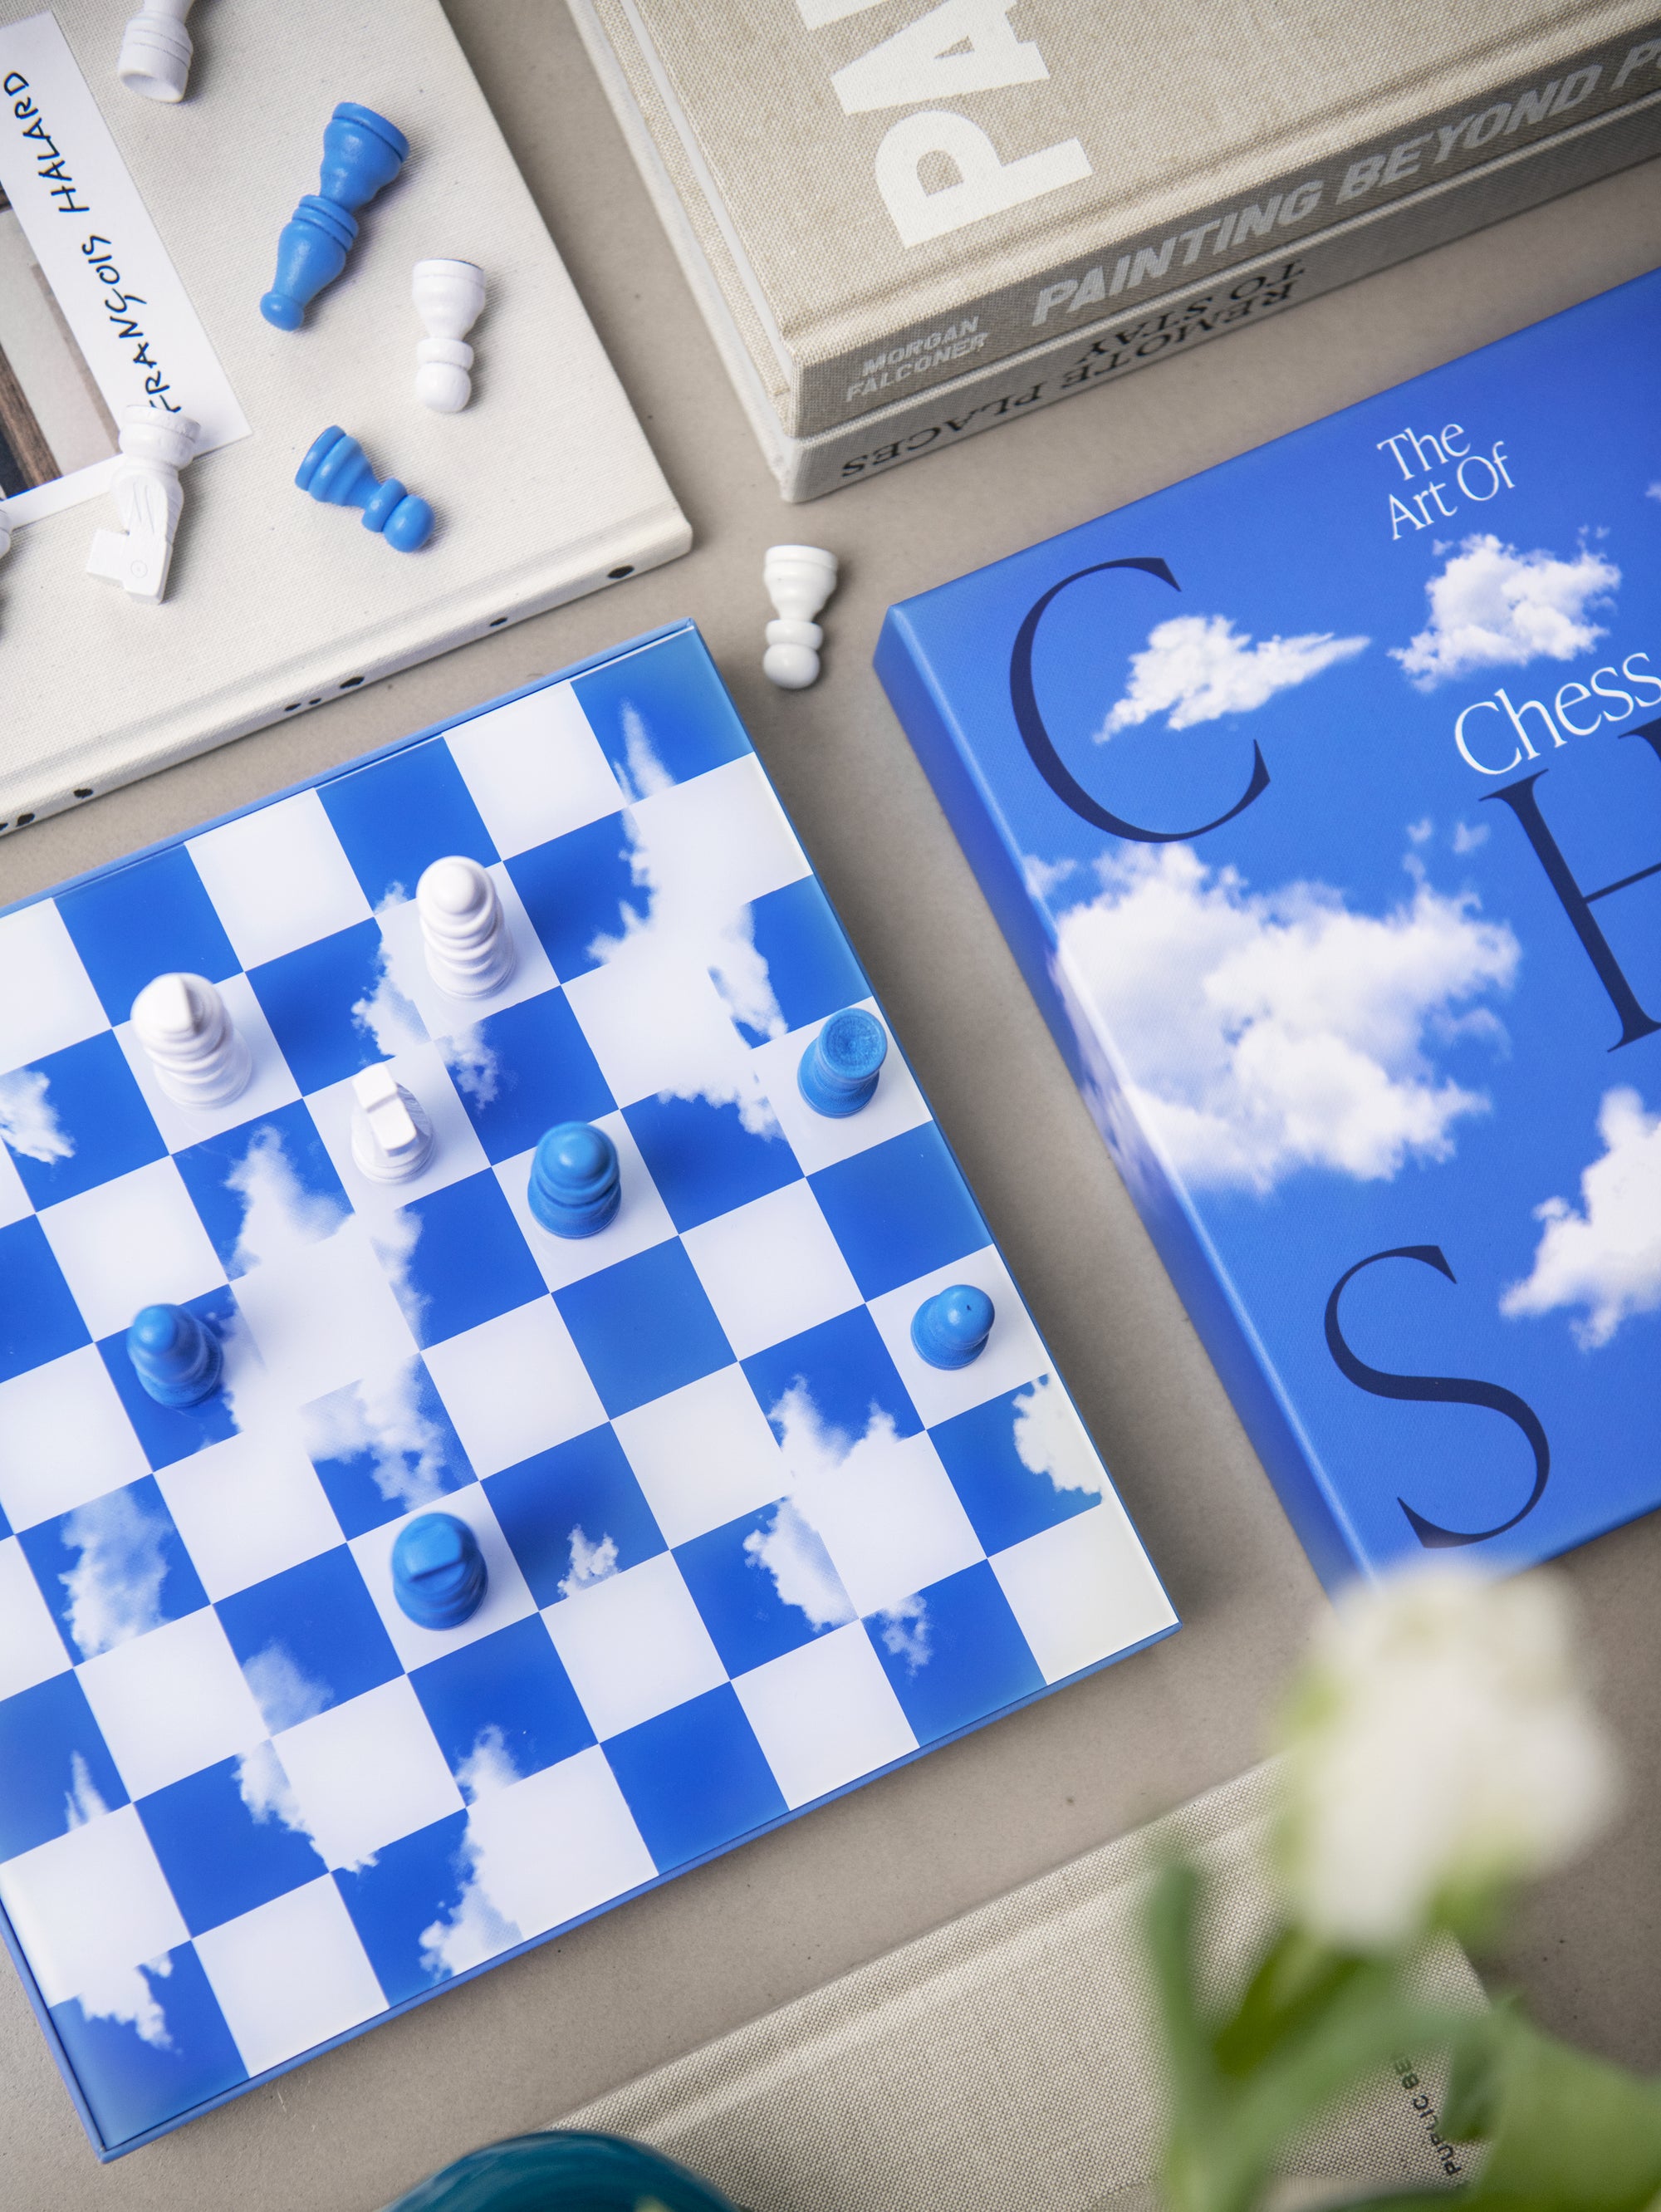 Art of Chess in Cloud